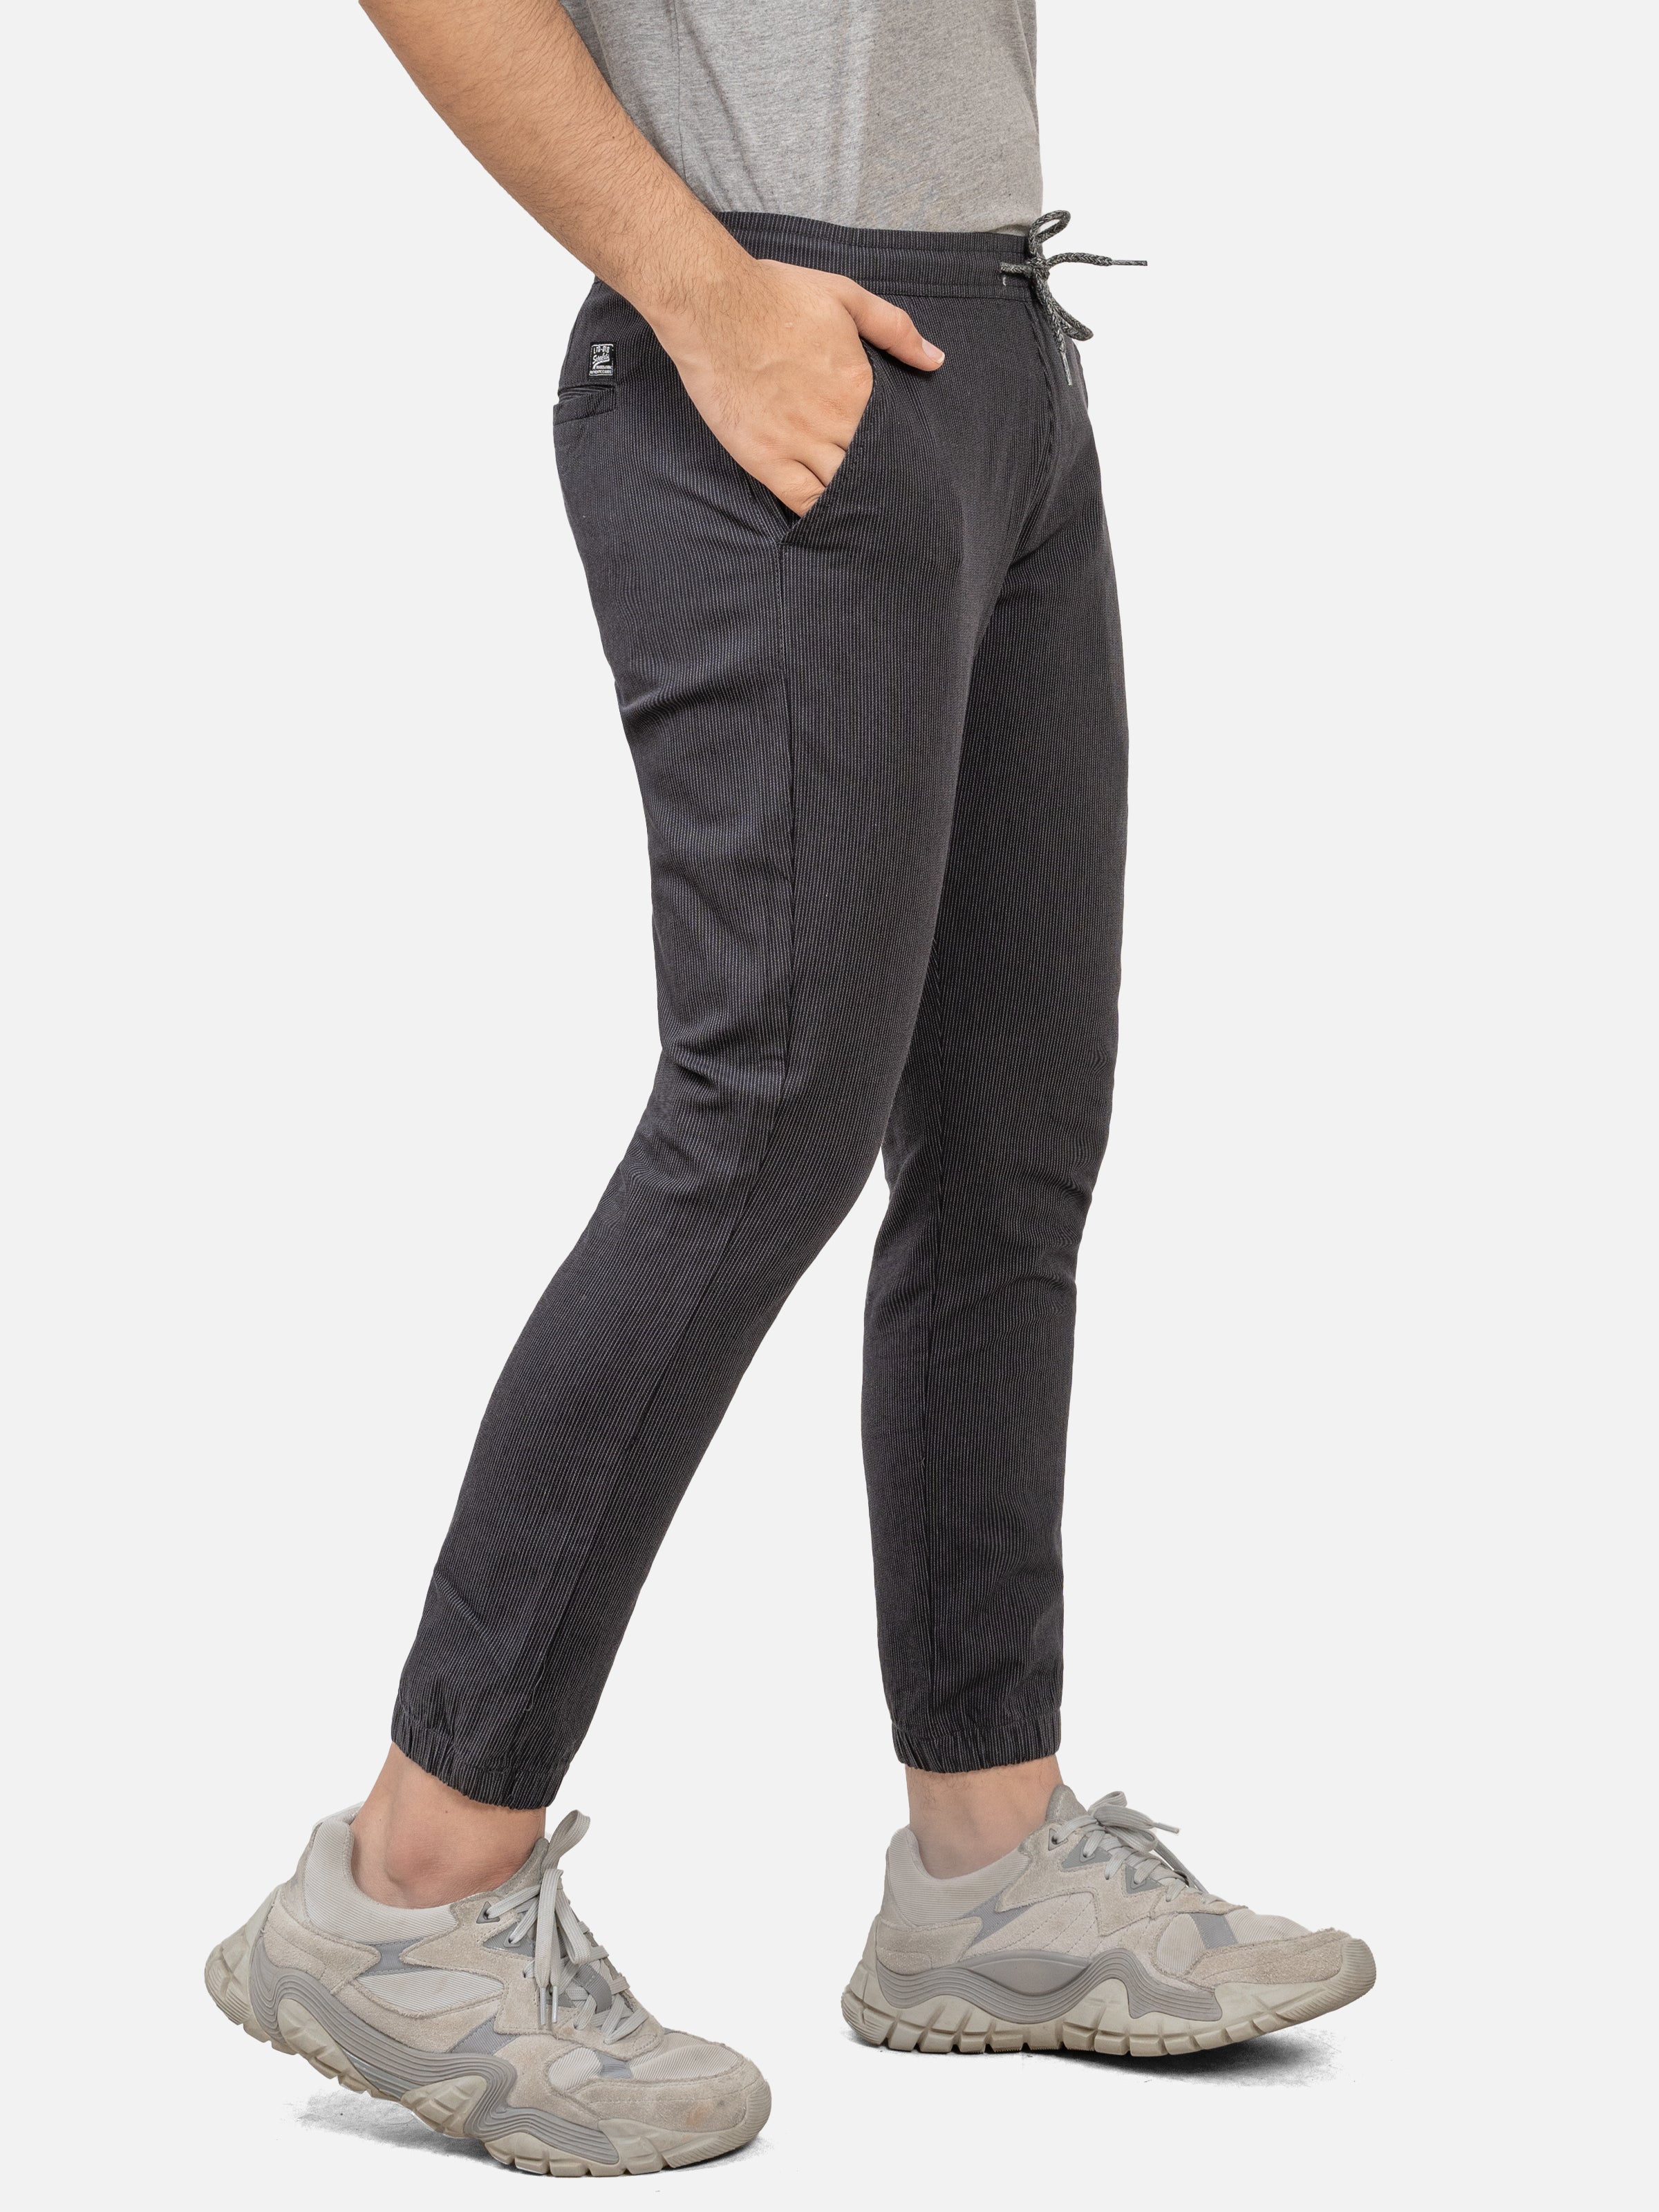 CASUAL TROUSER FRONT CROSS POCKET CHARCOAL